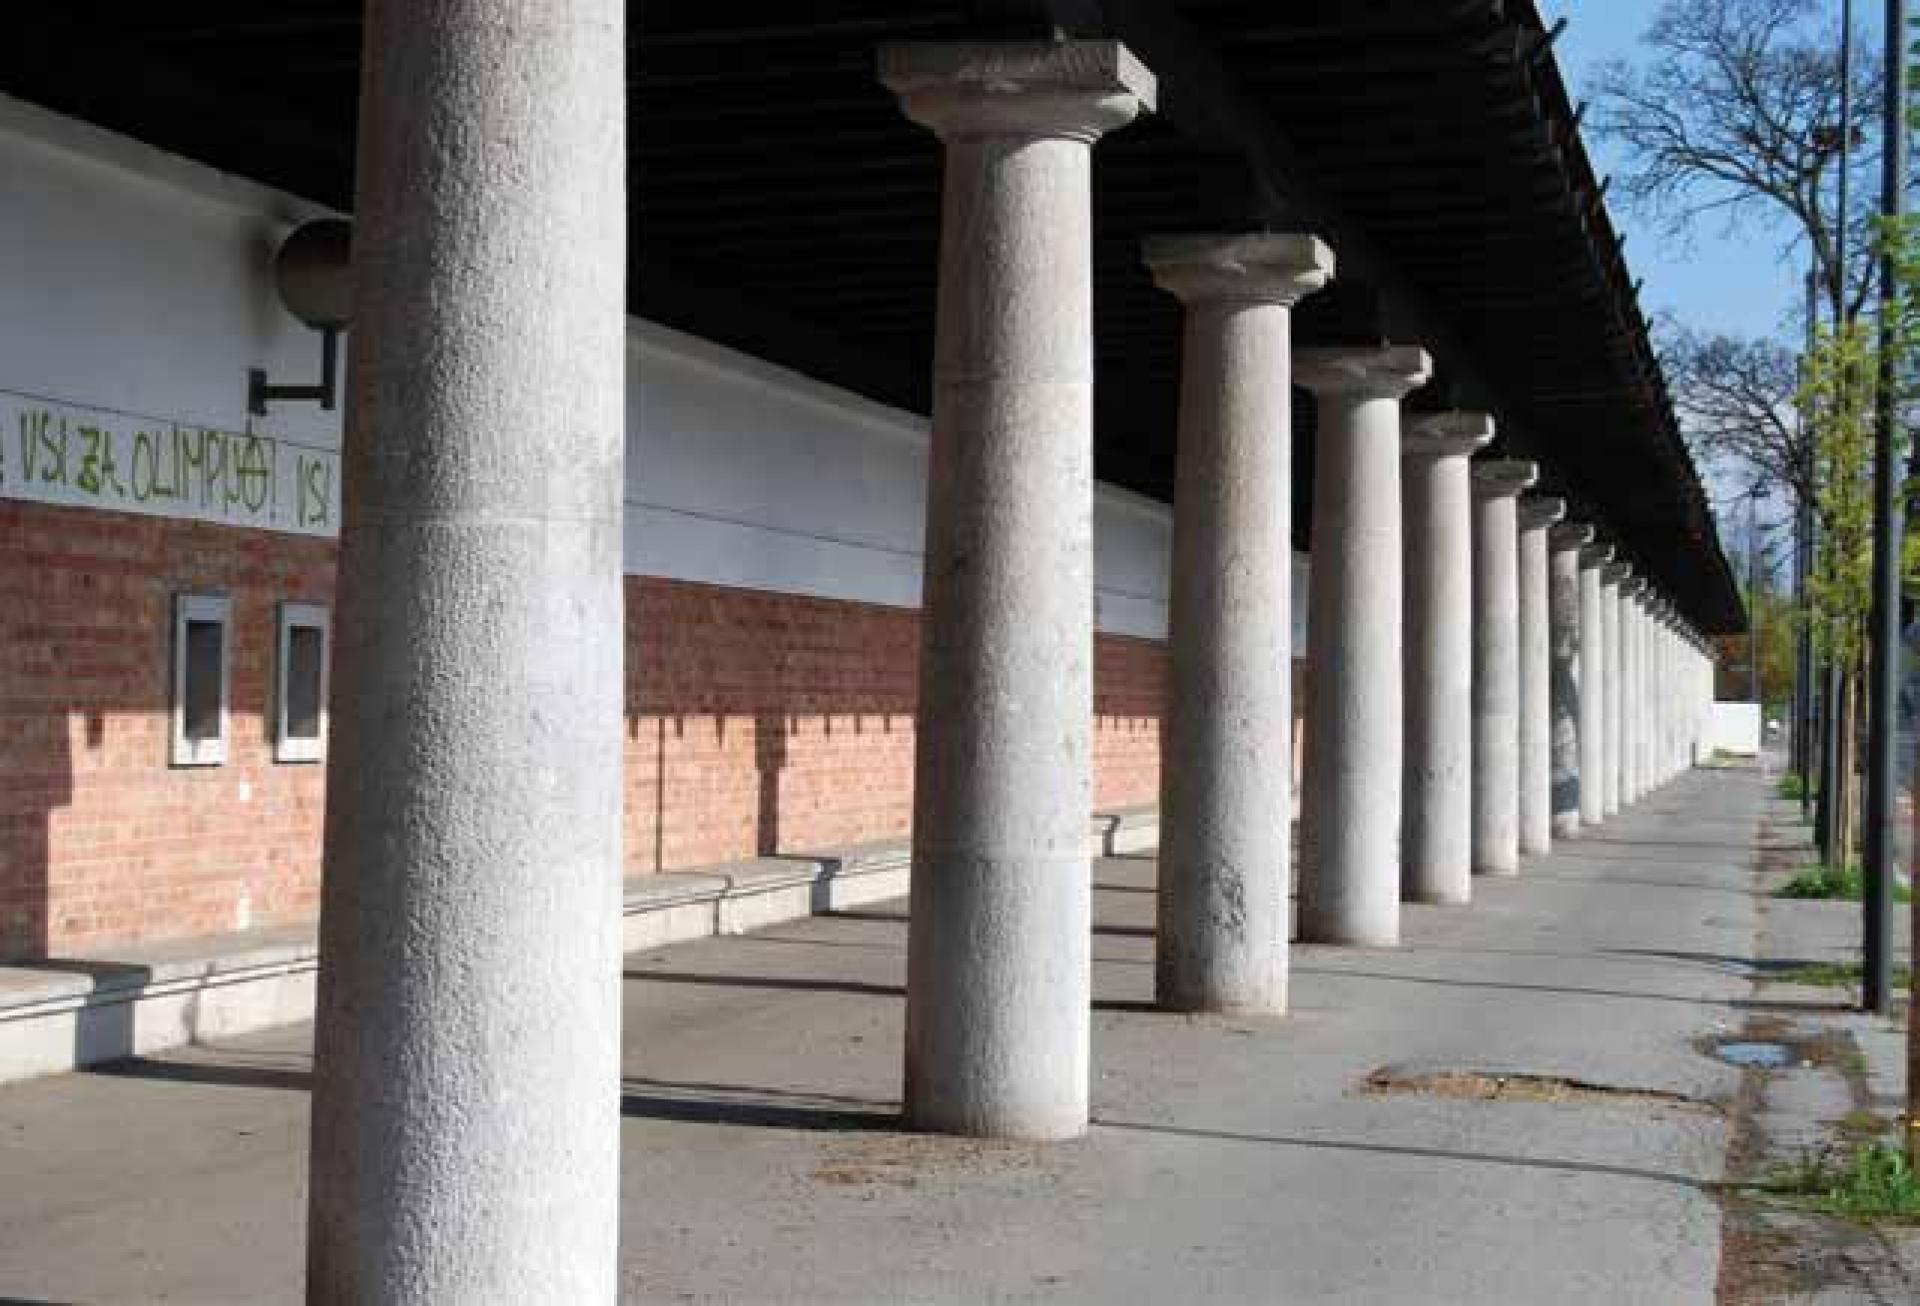 The monumental colonnade created a civic stoa or covered walkway that links the stadium enclosure with the city beyond as well as prviding for a covered space for people to queue. | Photo © Peter Krečič